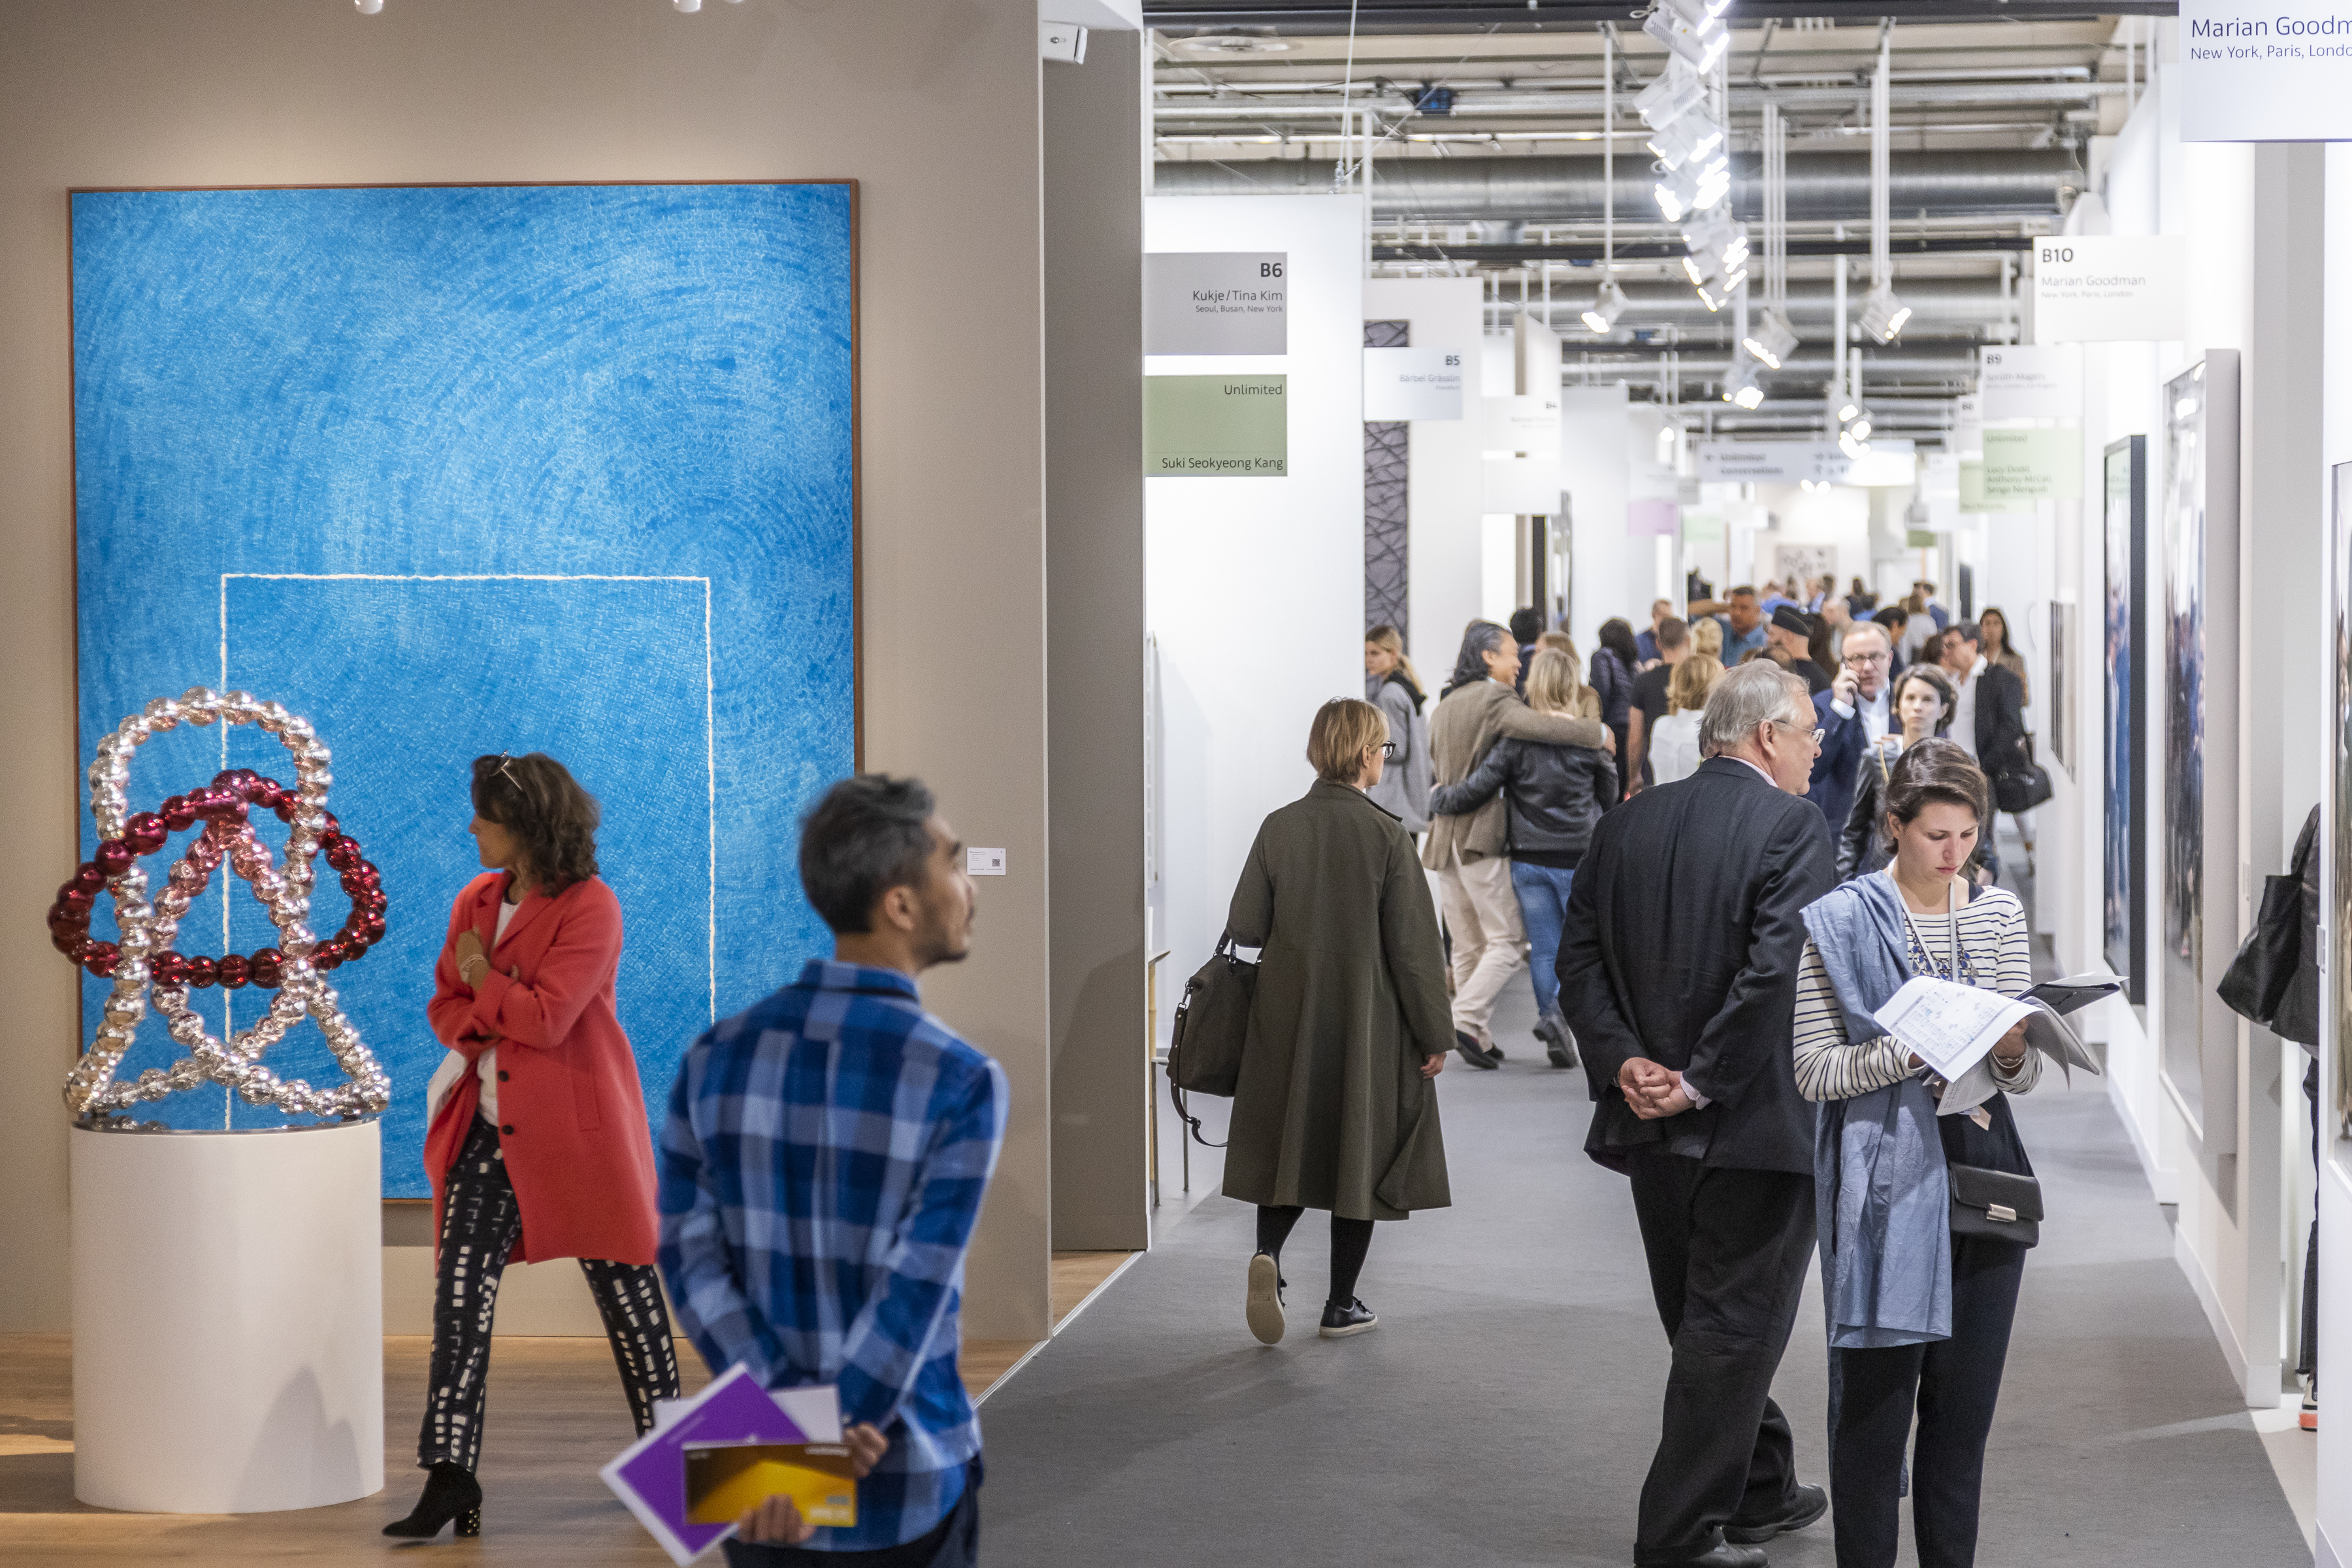 Art enthusiasts walk the art booths including a shiny beaded sculpture and large blue painting at Art Basel (2019).